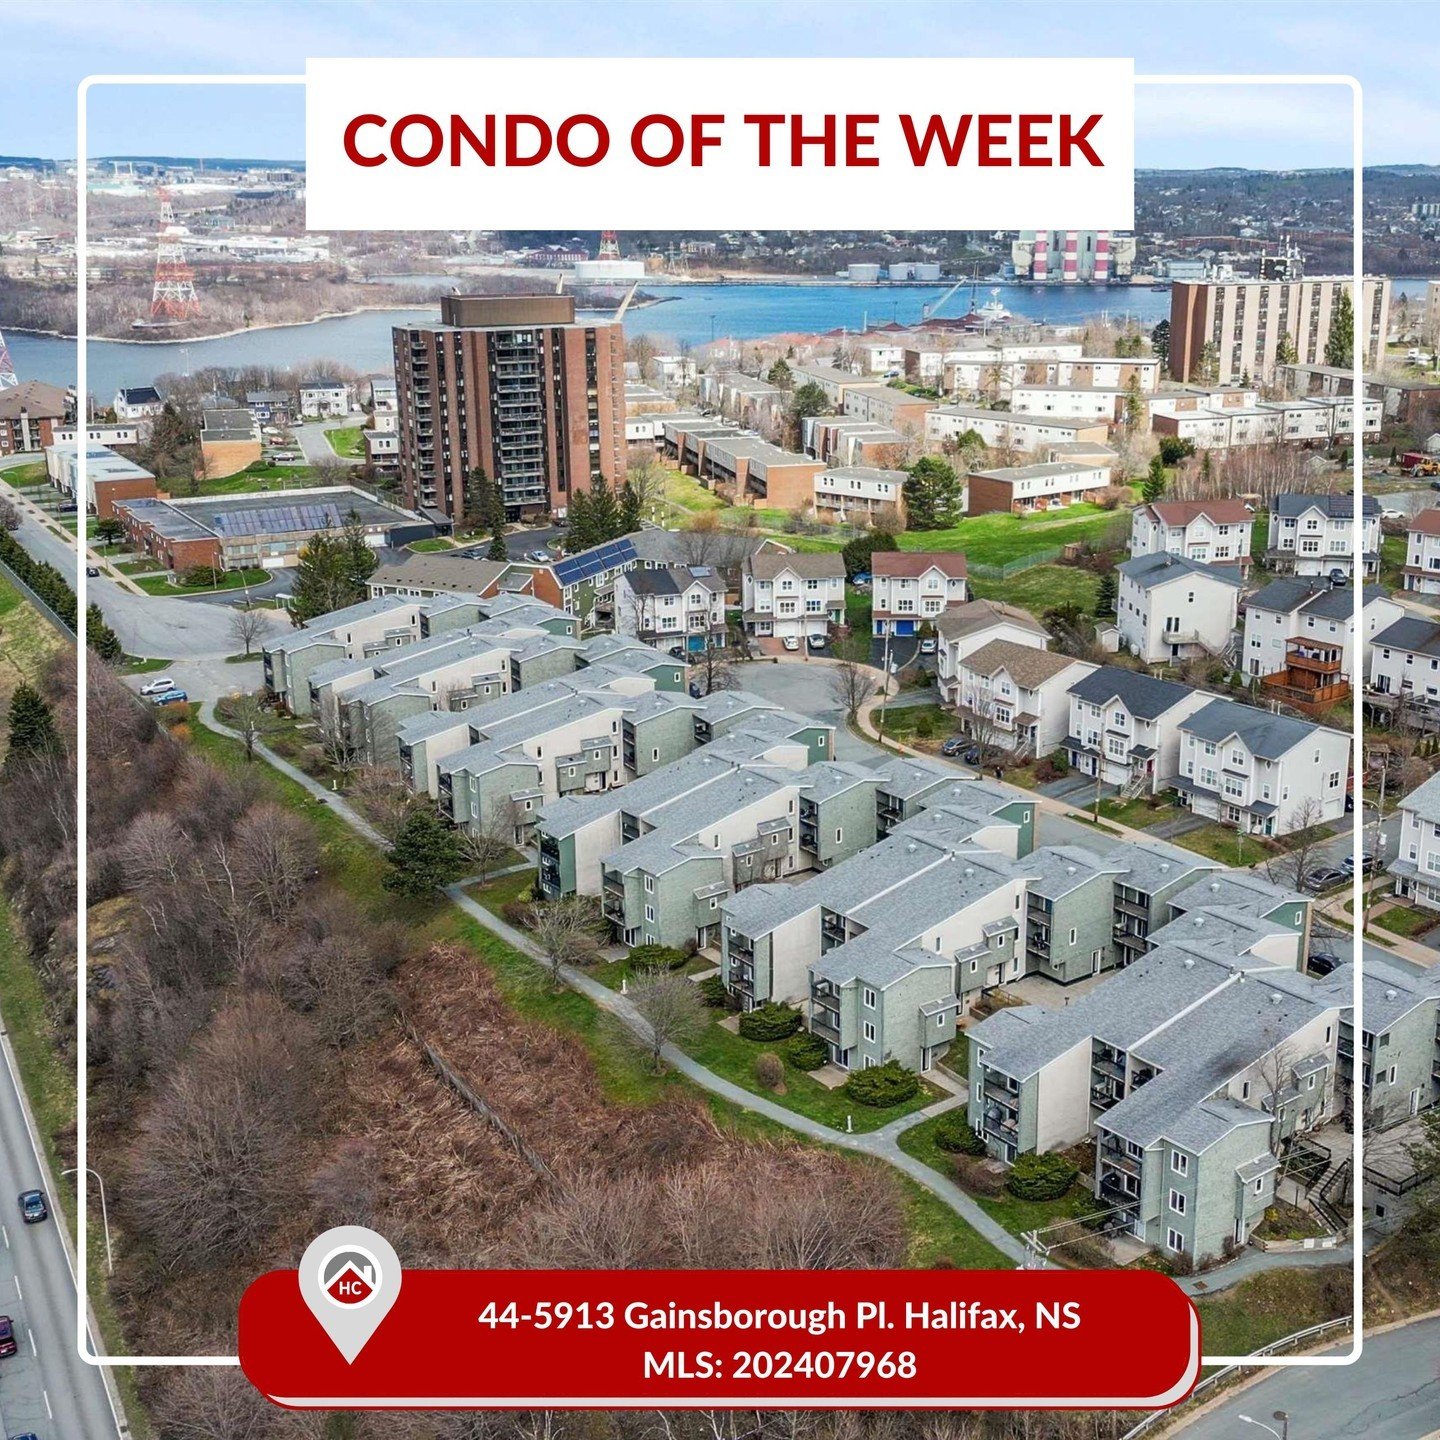 Featured Condo of the Week!
44-5913 Gainsborough Place 🤩
DM us to schedule a viewing!

🟢 Status: For Sale
💰 Price: $529,900
🛏️ 4 Bedrooms
🛁 2 Bathrooms
📐 1,513 Square Feet

🏠 Listing Agents: @markus.sampson &amp; @neal.andreino with the MKR Gr